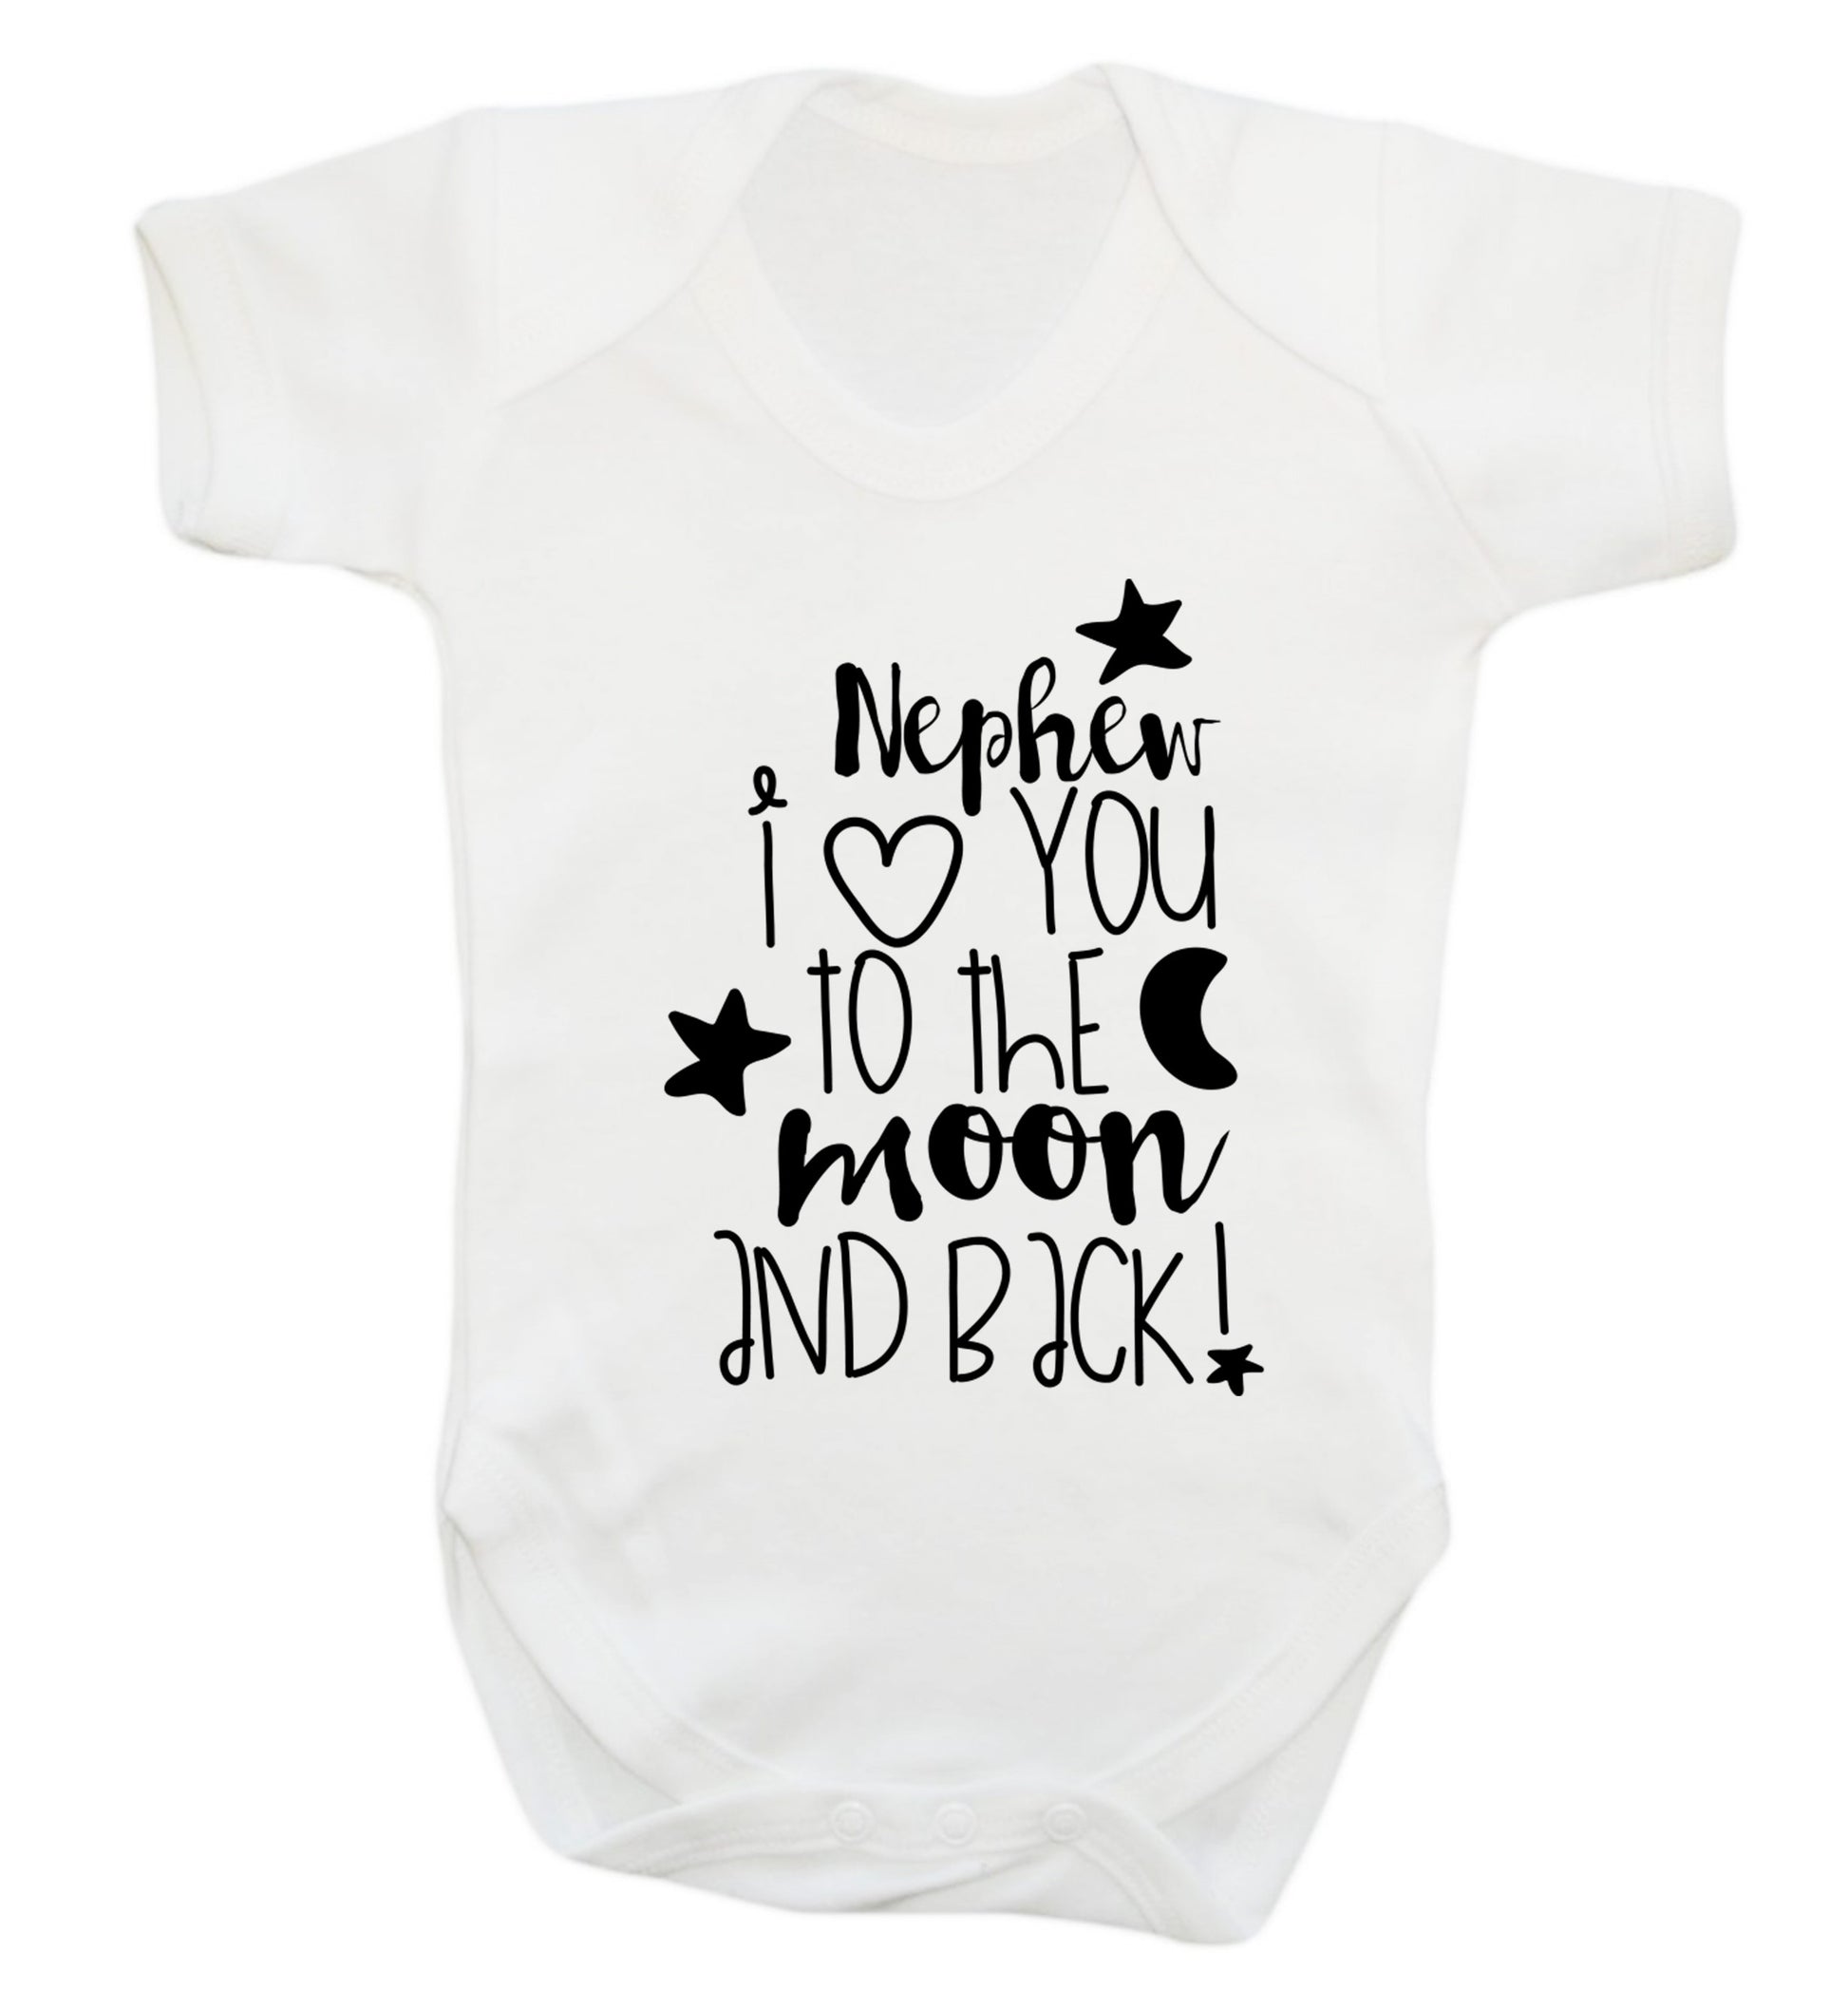 Nephew I love you to the moon and back Baby Vest white 18-24 months